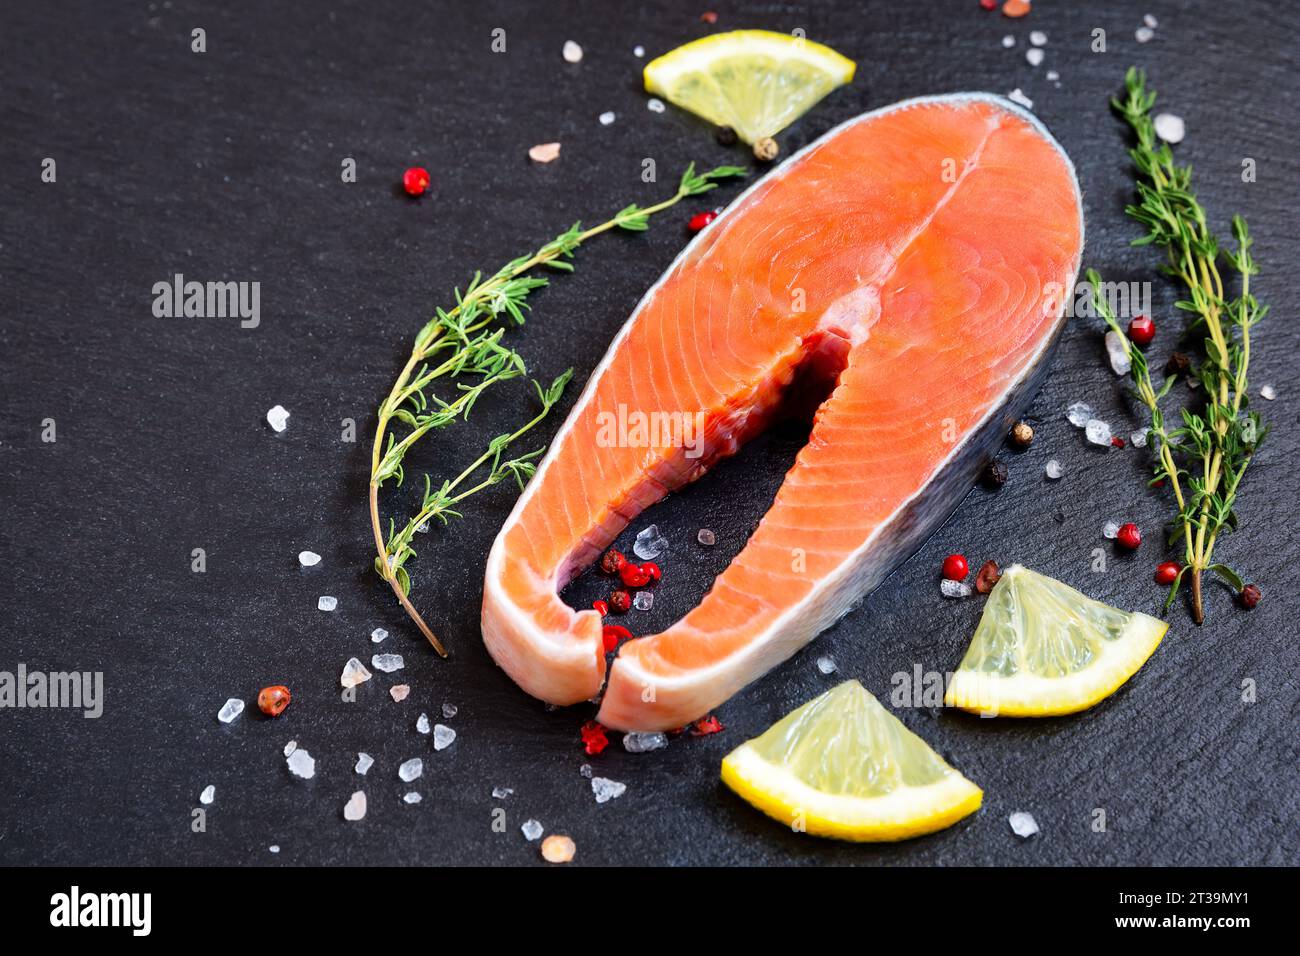 Fresh raw salmon fish steak with cooking ingredients, herbs and lemon on black background, top view. Salmon steak with thyme and lemon on black table. Stock Photo